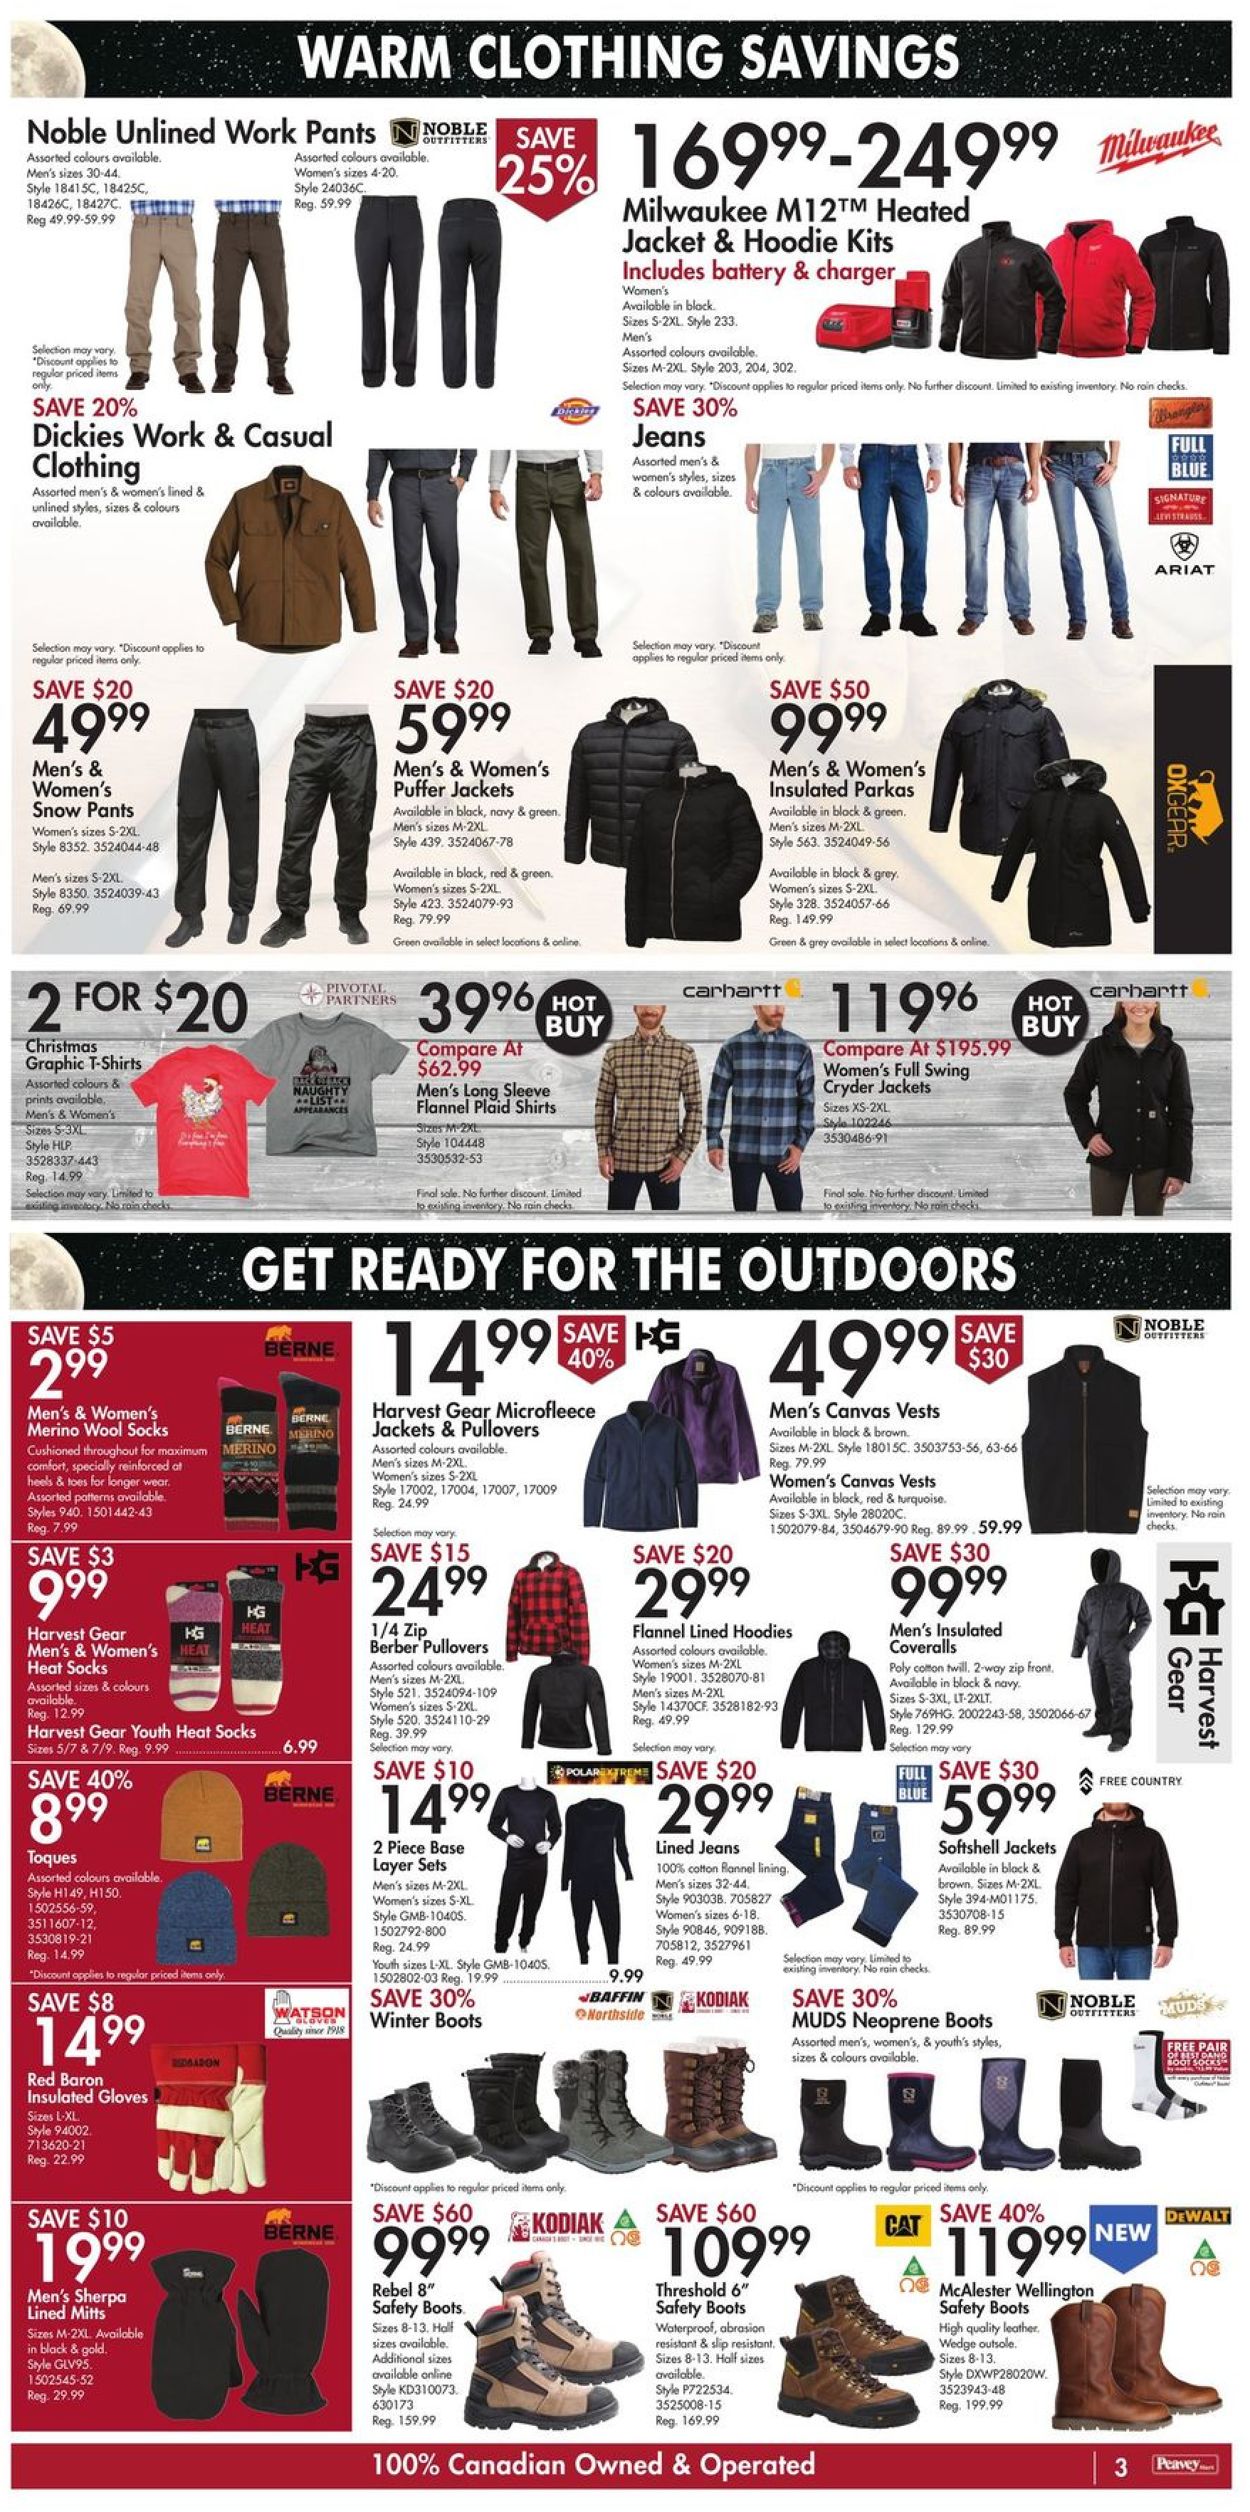 Peavey Mart Flyer from 11/25/2021